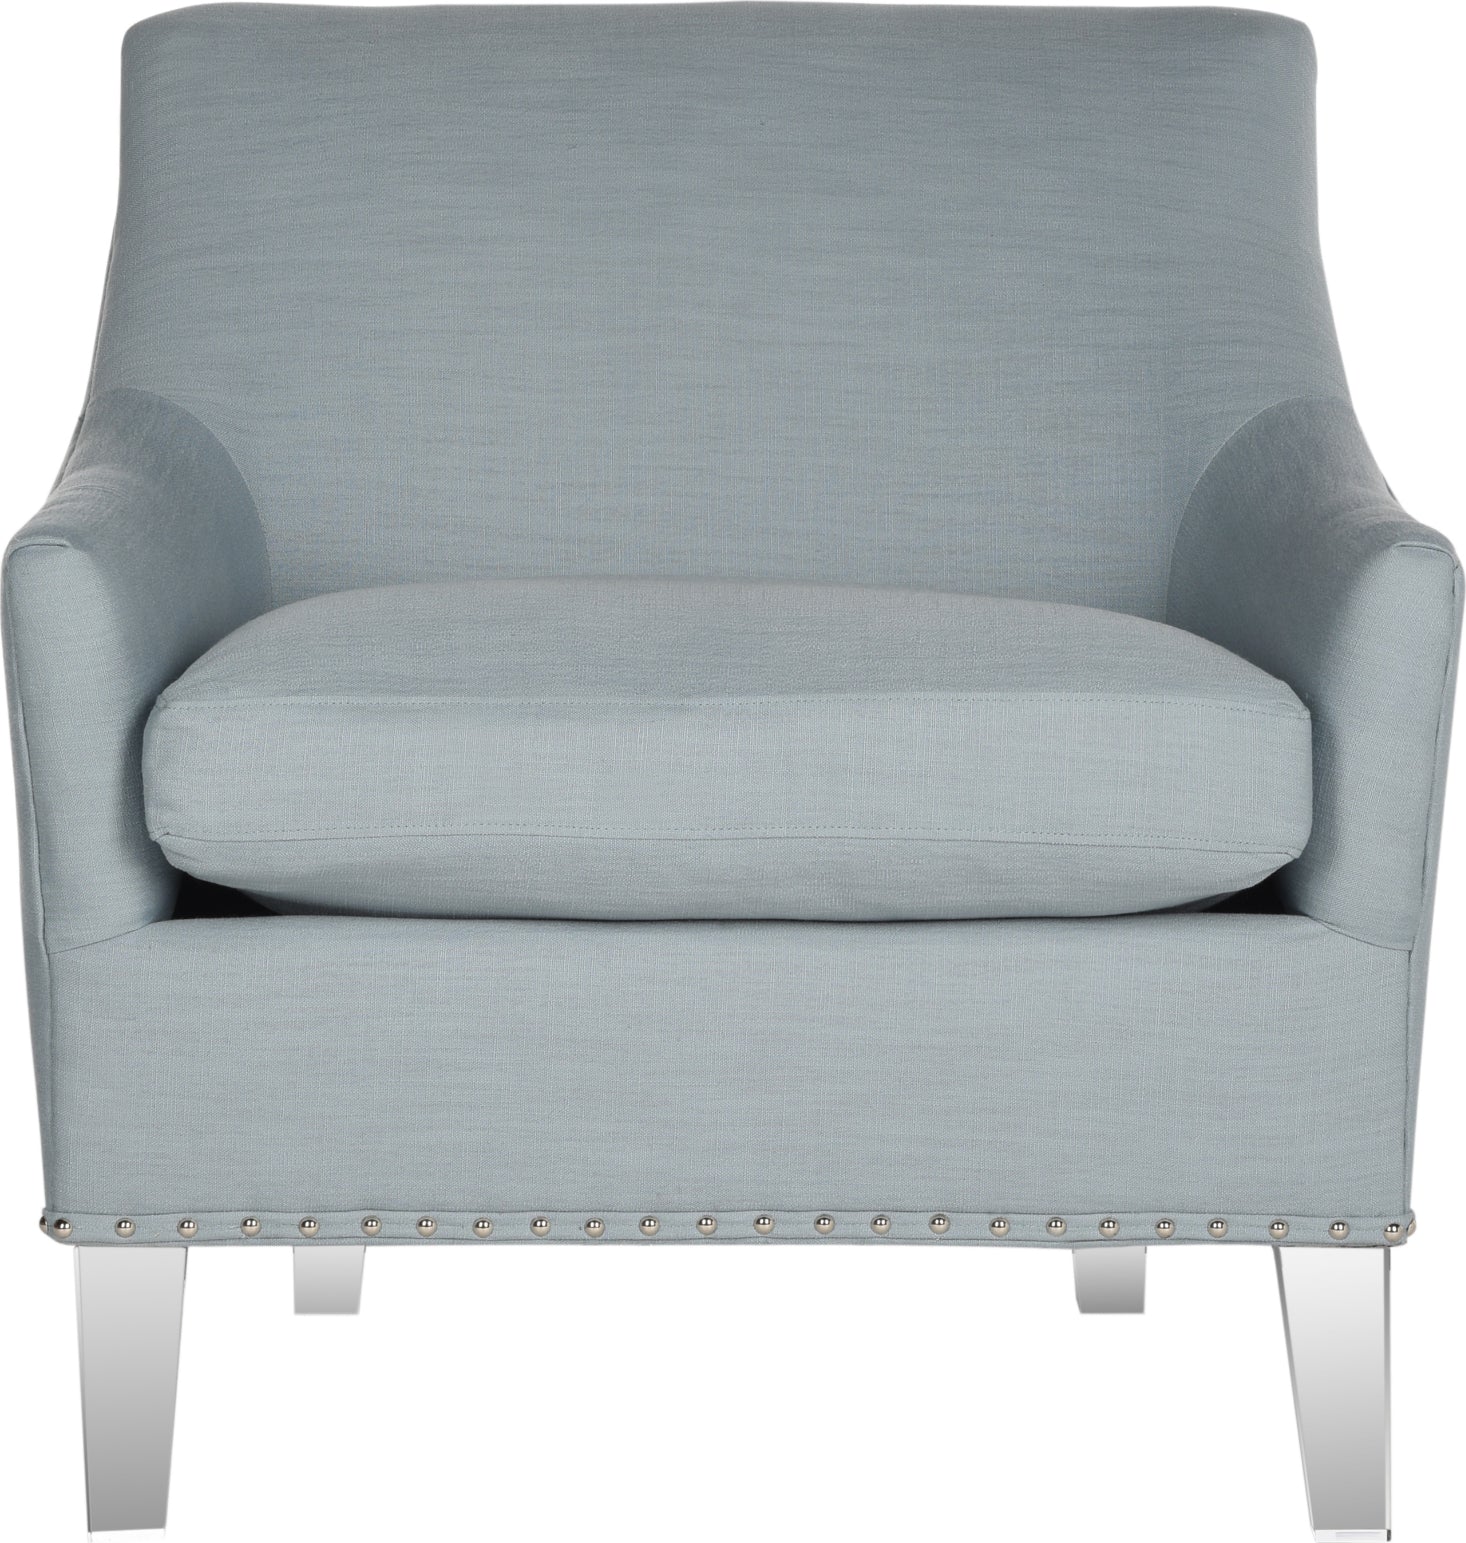 Safavieh Hollywood Glam Acrylic Teal Club Chair and Clear Furniture main image